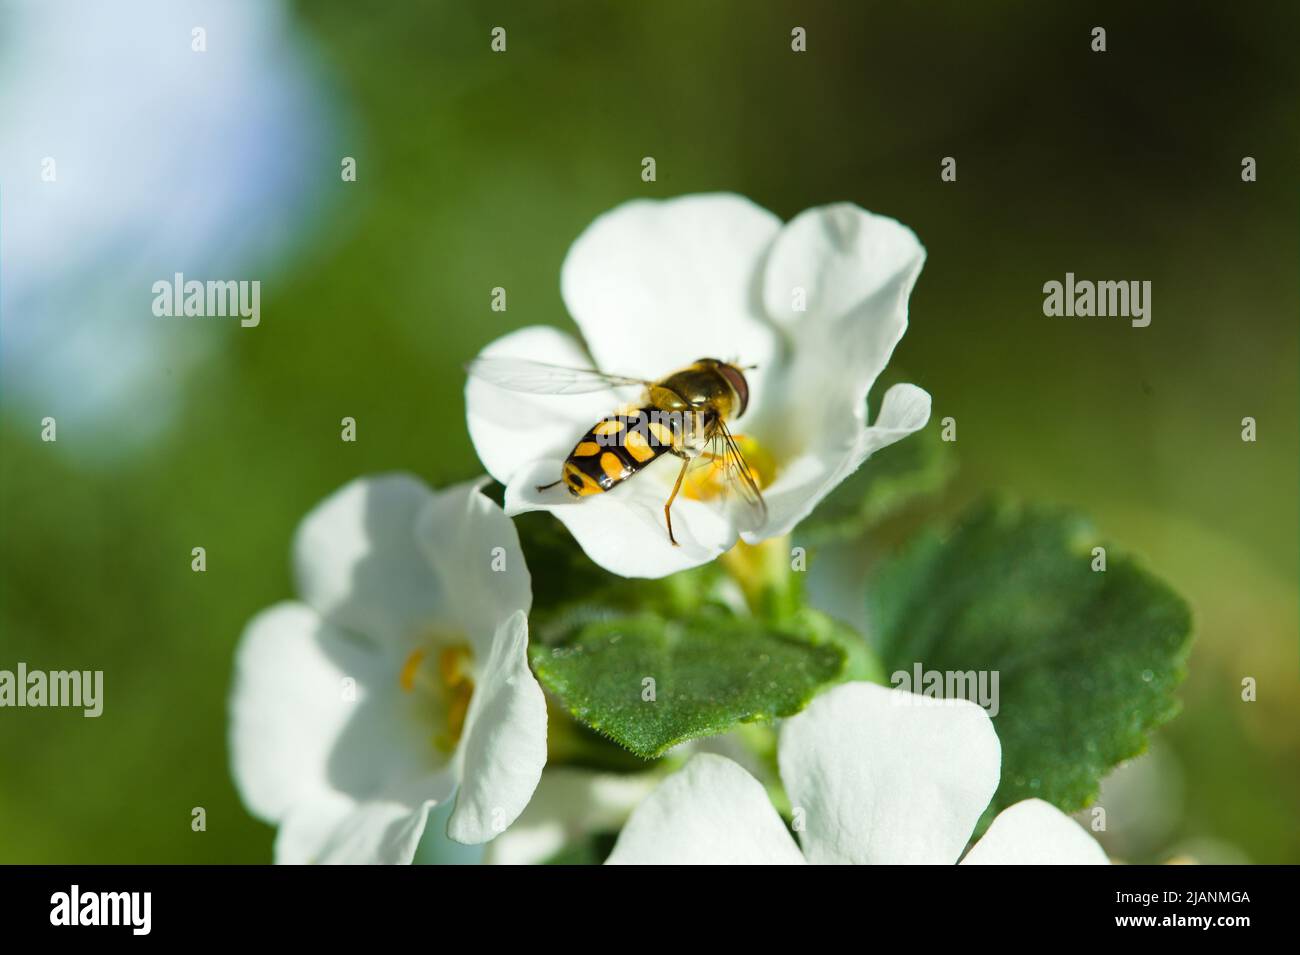 Biodiversity - Close-up of a hoverfly foraging in a white flower Stock Photo